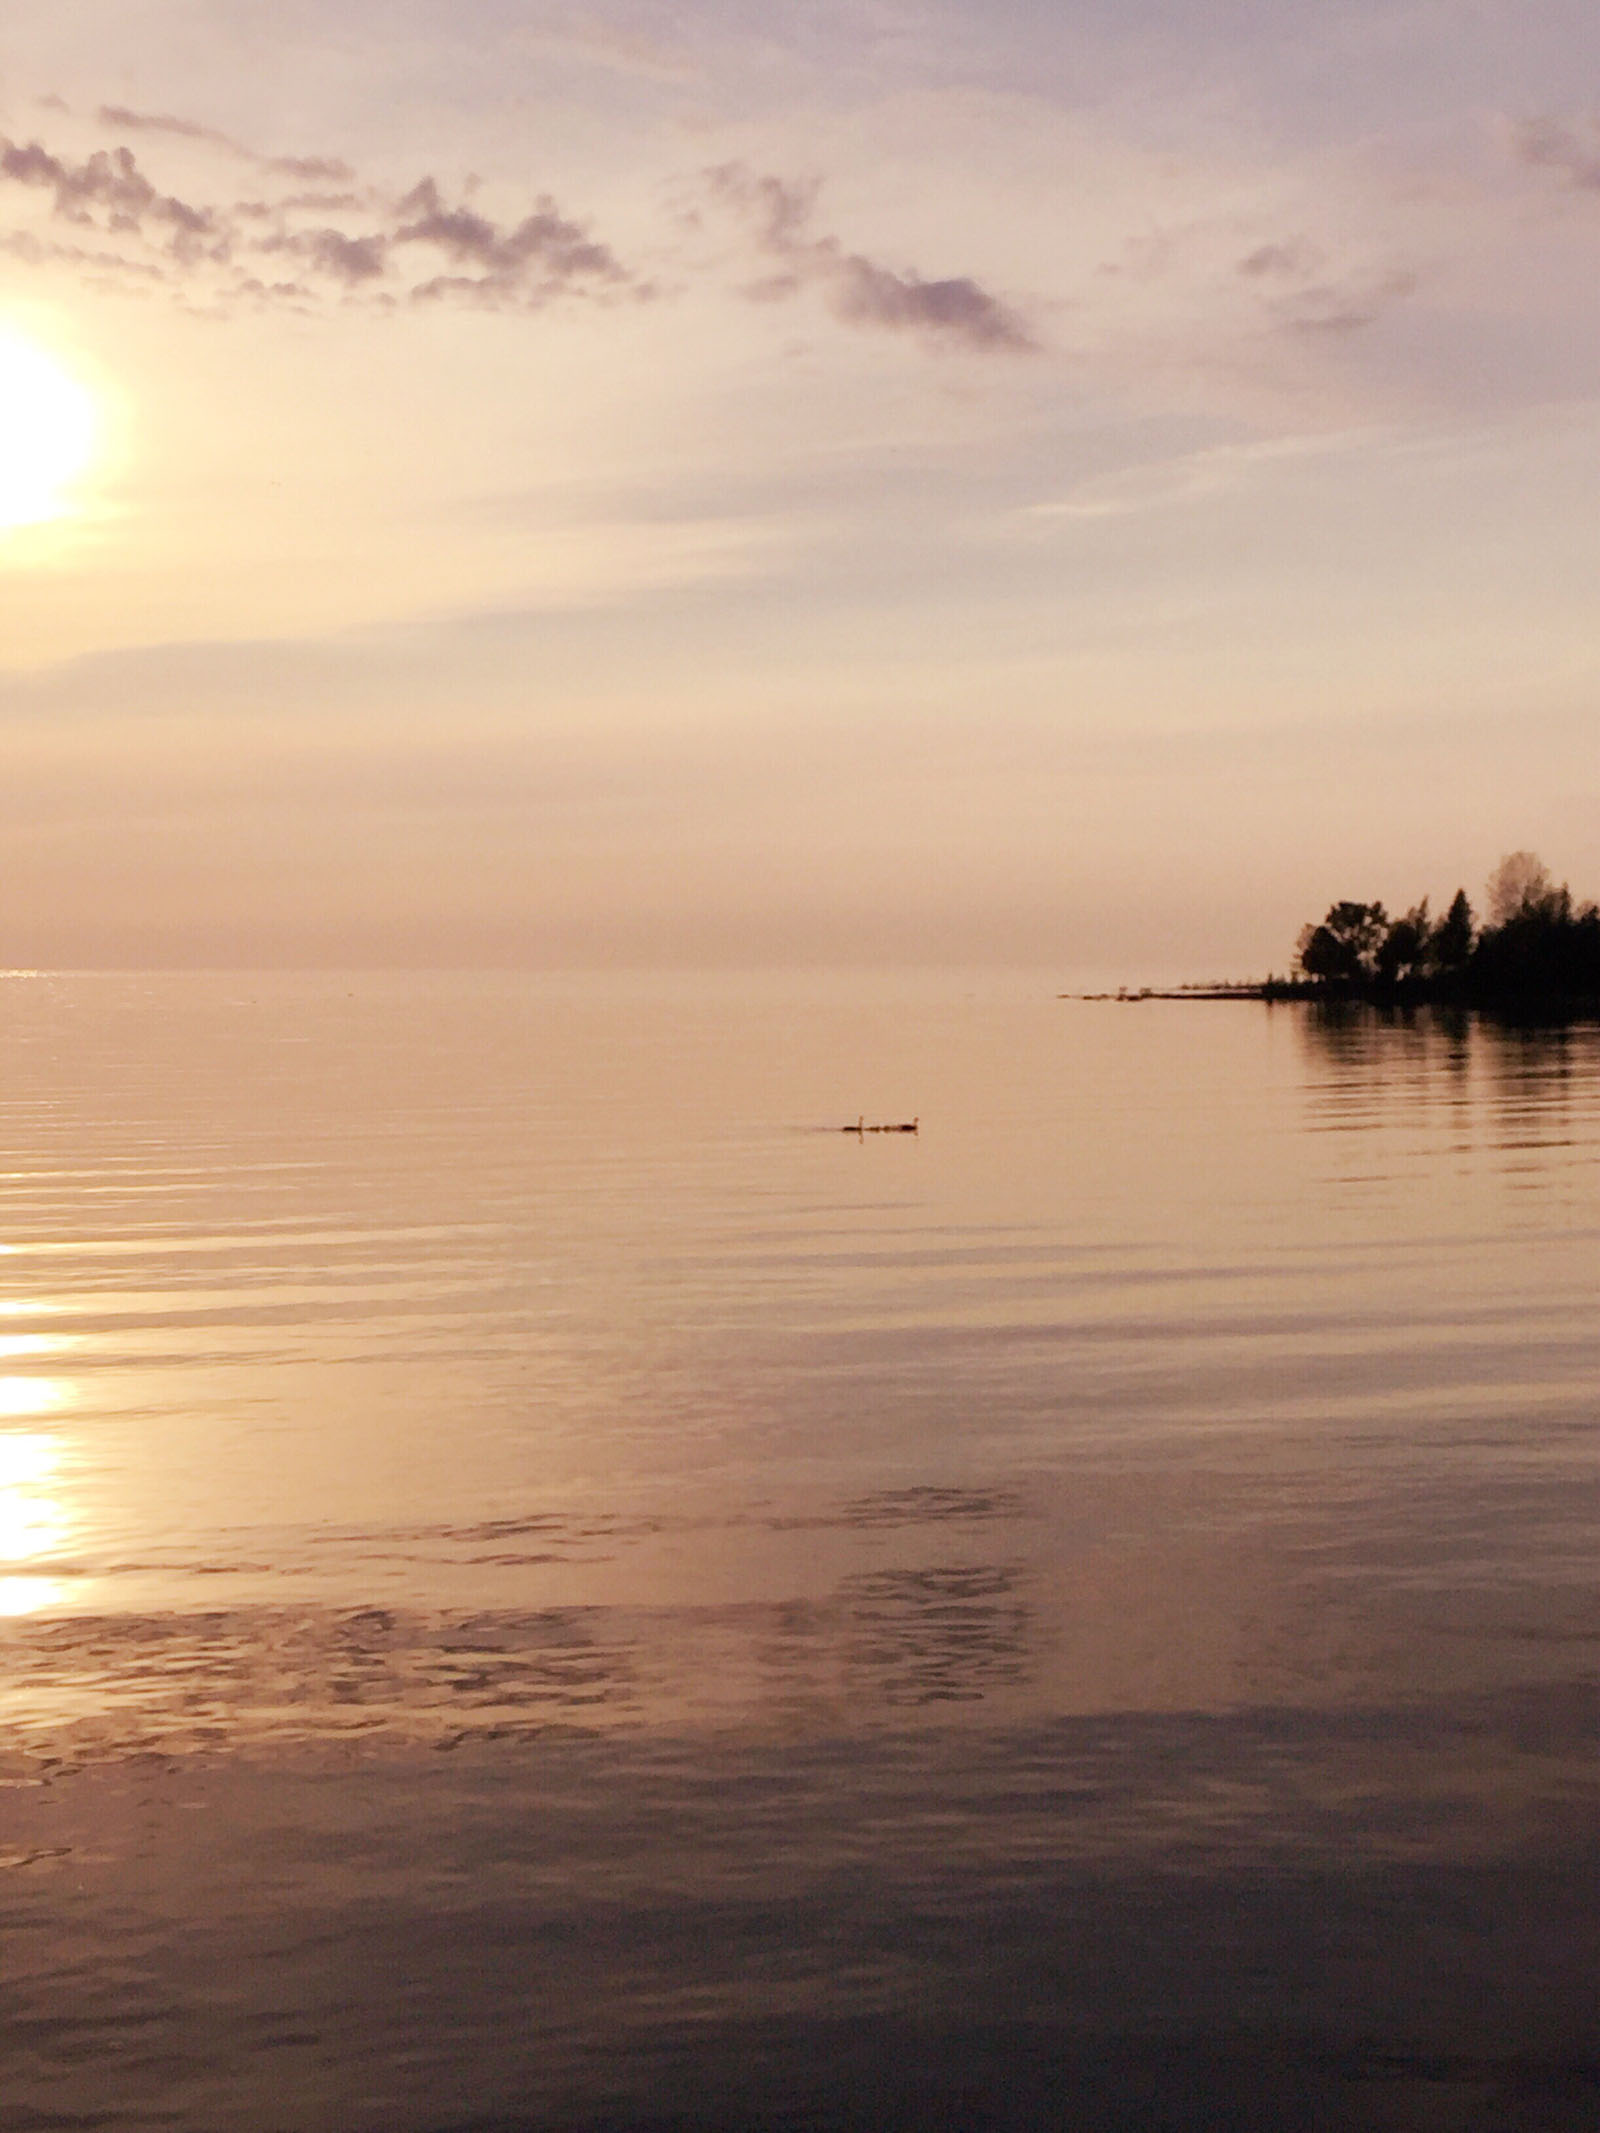 reasons to visit the Great Lakes, sunsets on the Great Lakes